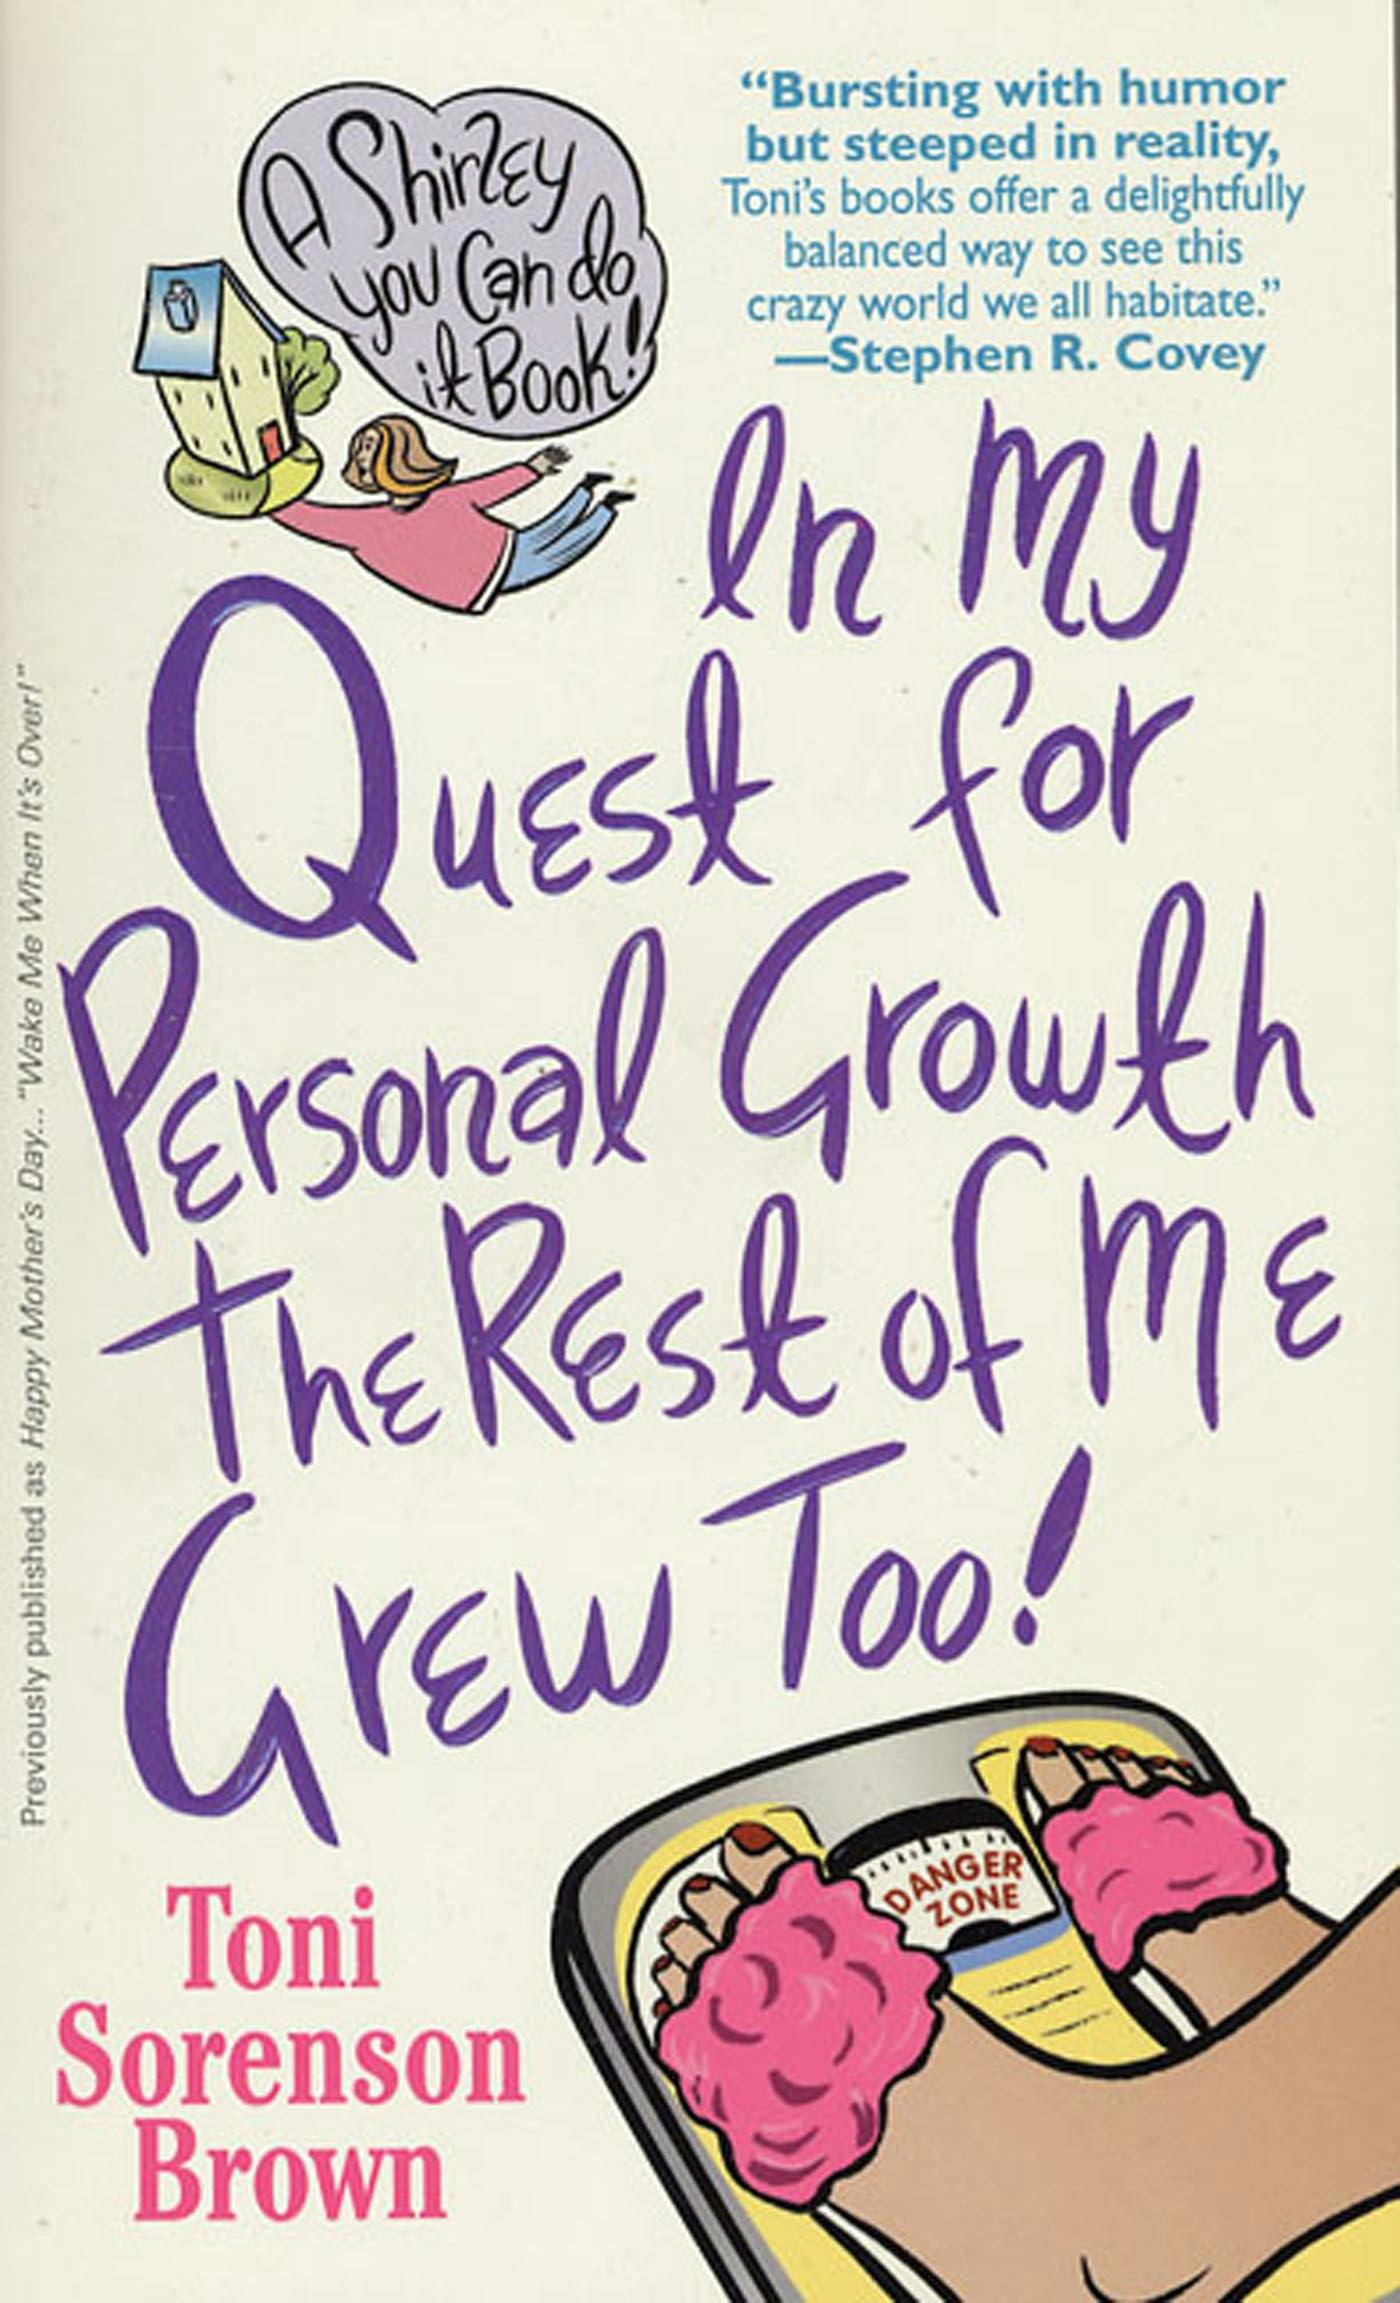 In My Quest For Personal Growth, The Rest Of Me Grew Too!